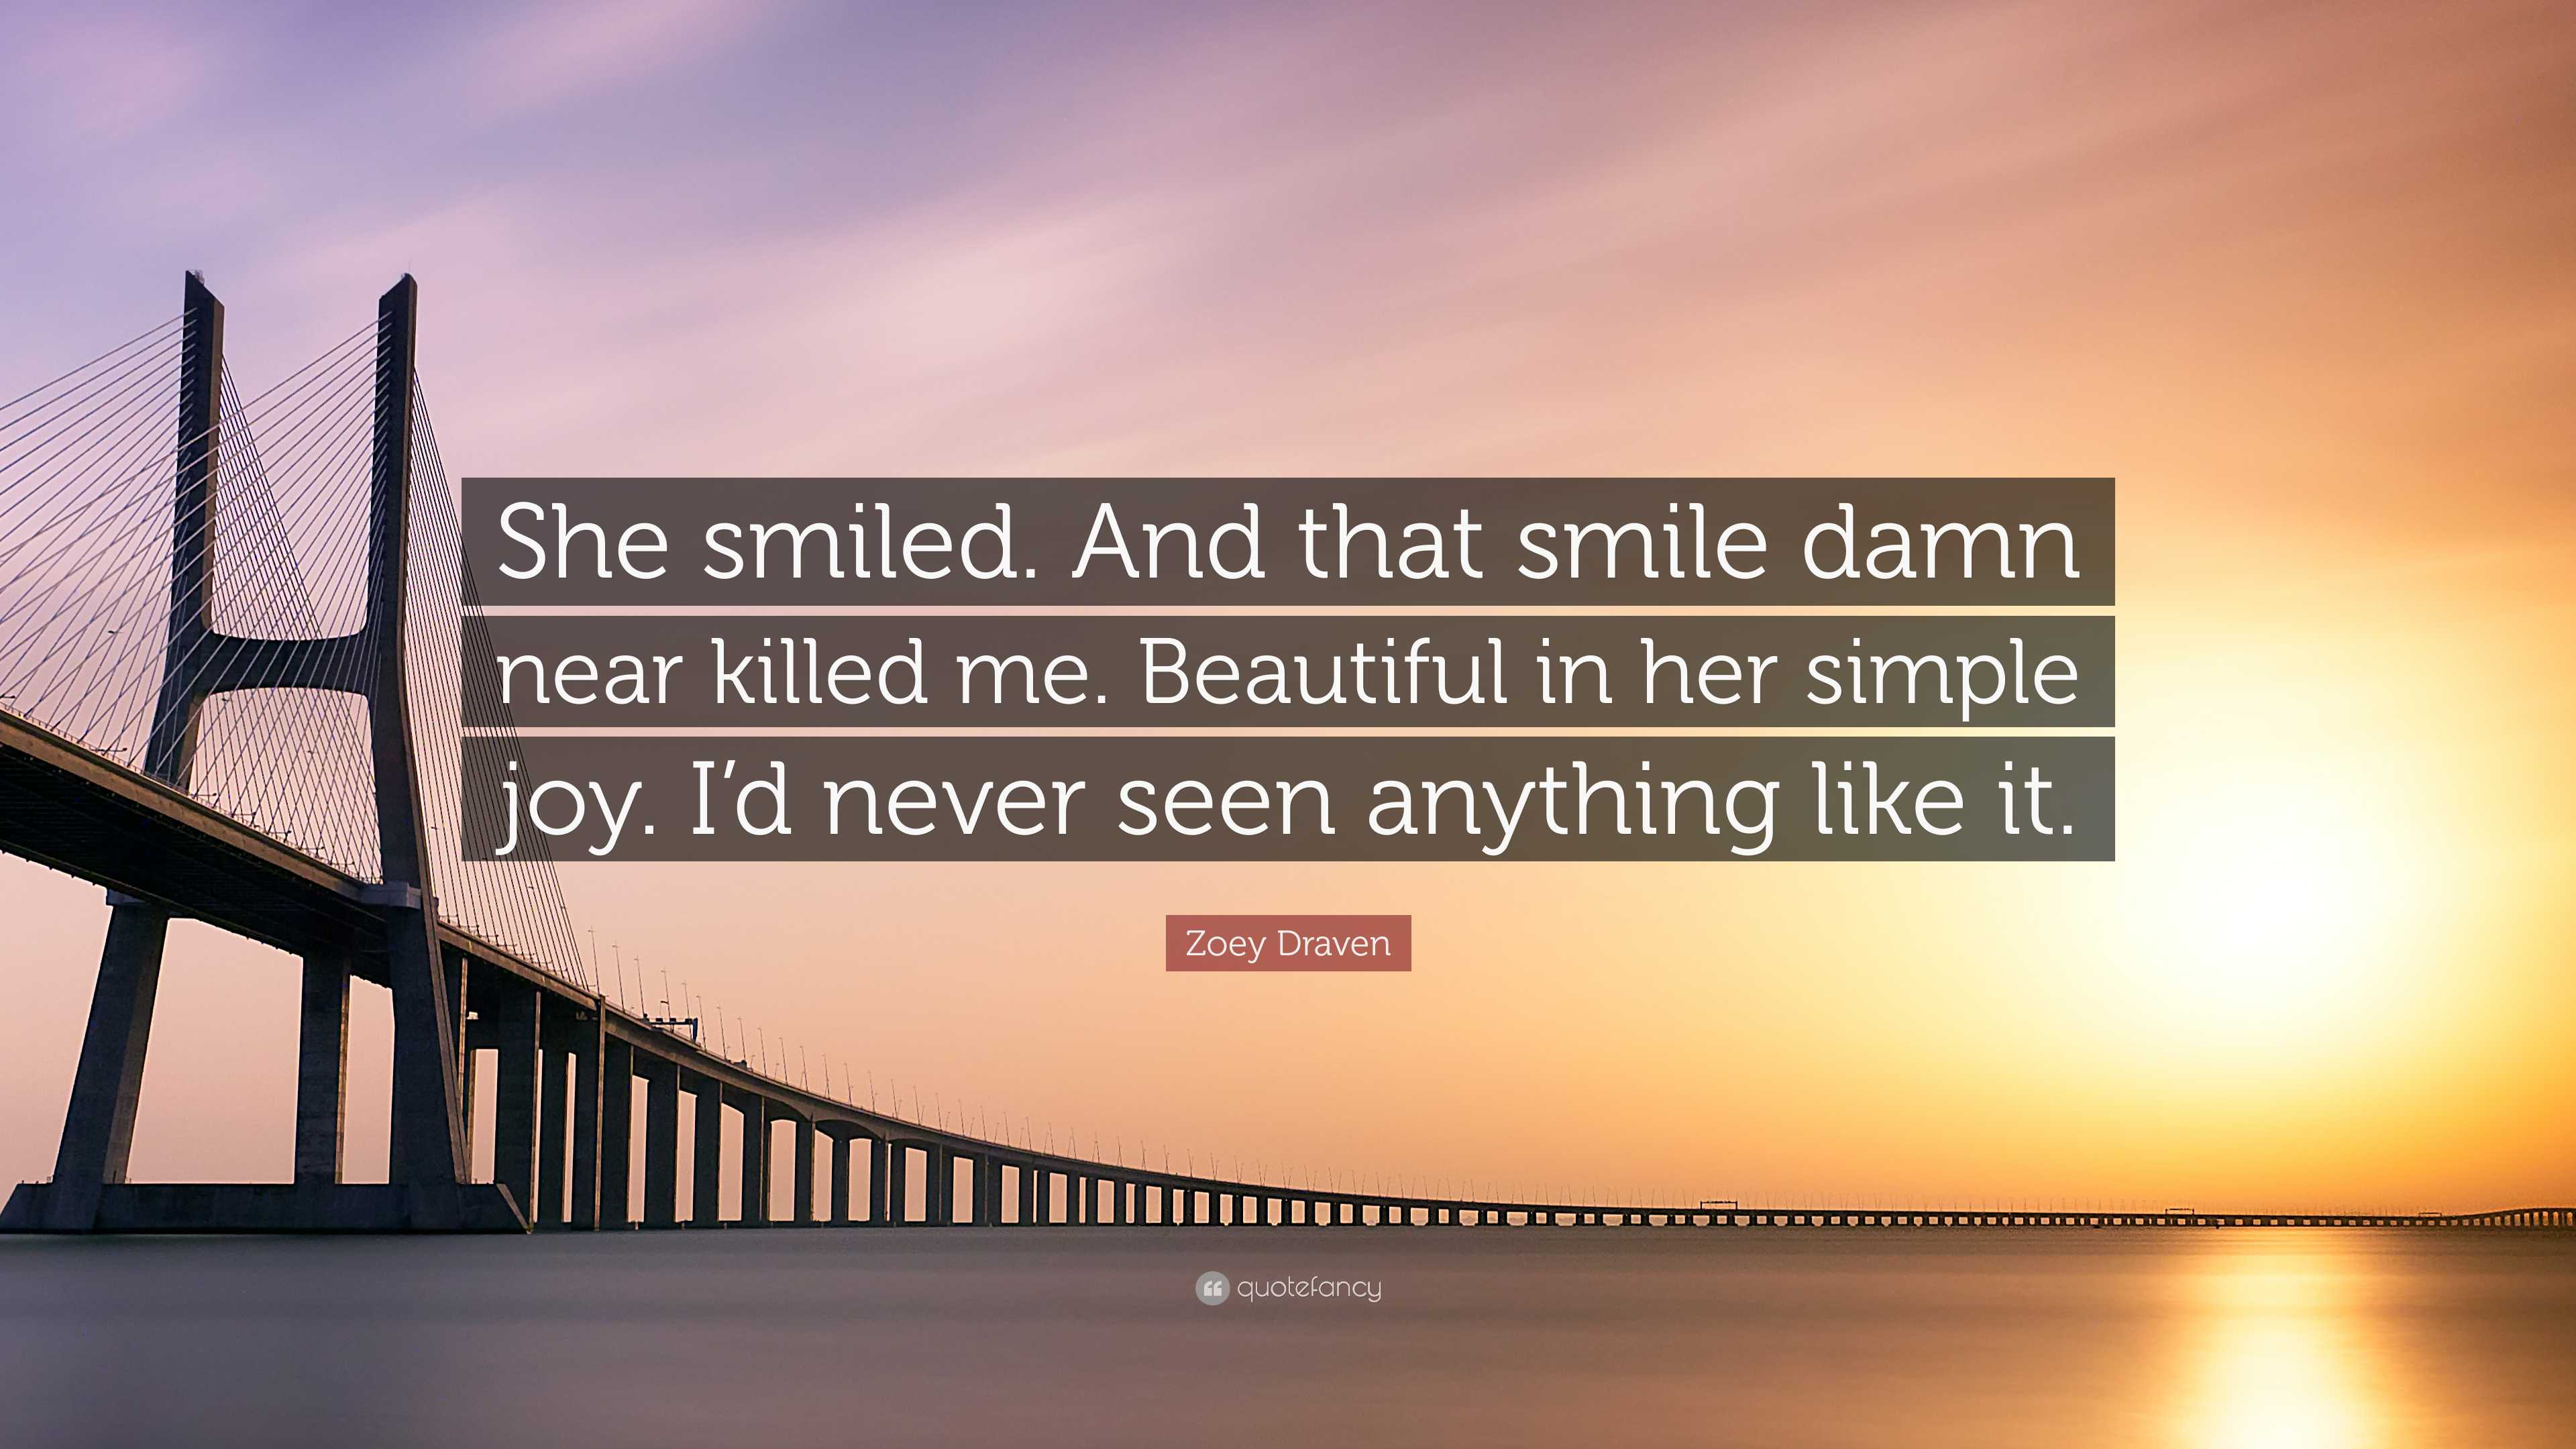 Zoey Draven Quote: “She smiled. And that smile damn near killed me.  Beautiful in her simple joy. I'd never seen anything like it.”